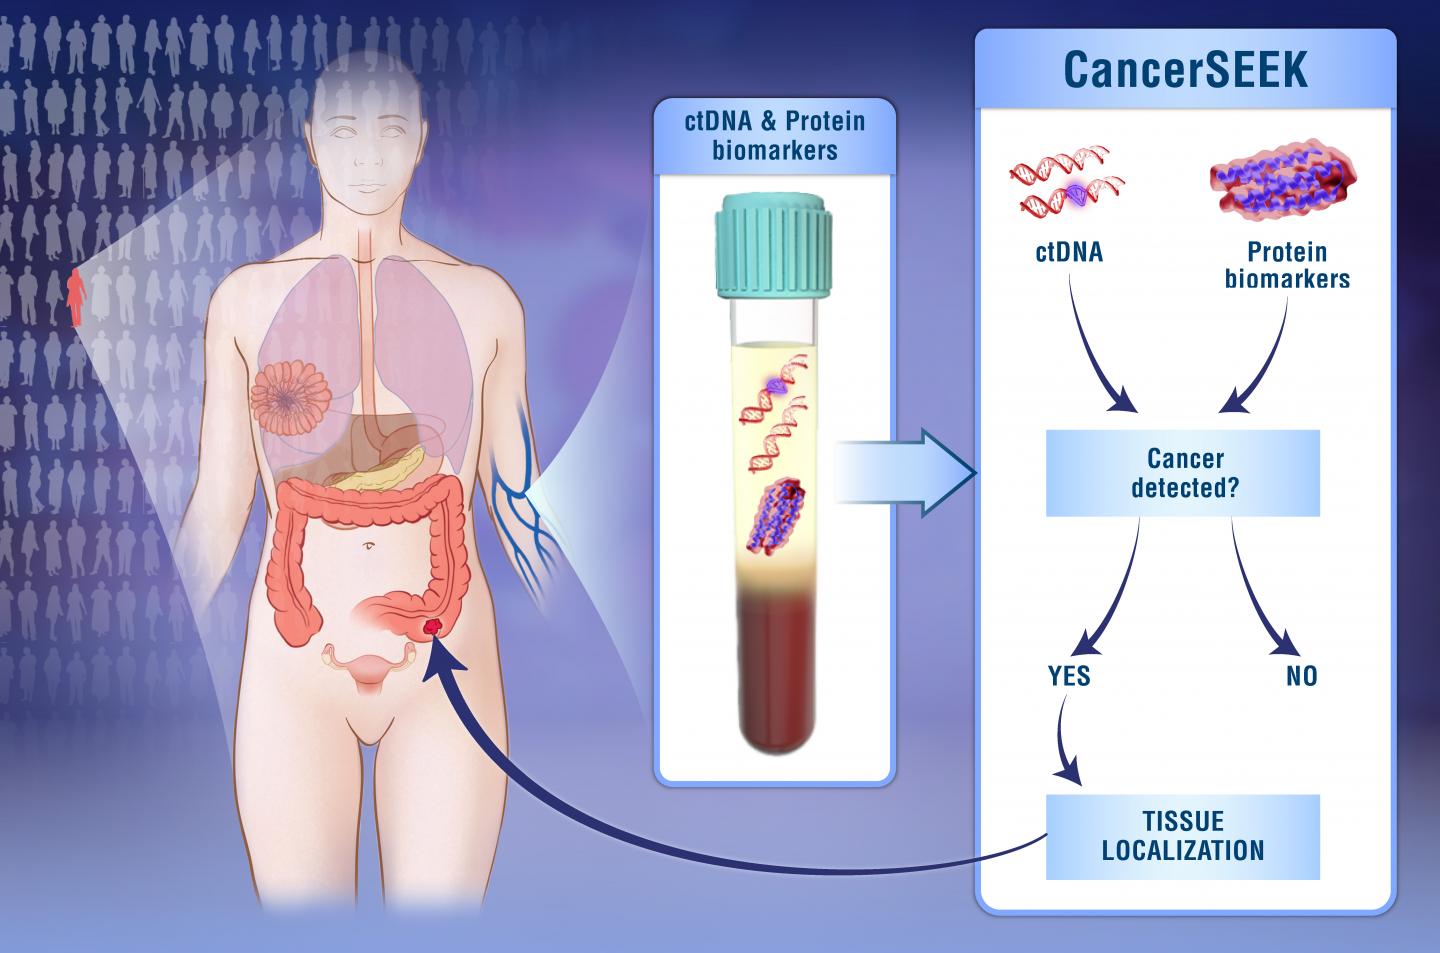 CancerSEEK: Generalized Screening for Multiple Cancer Types